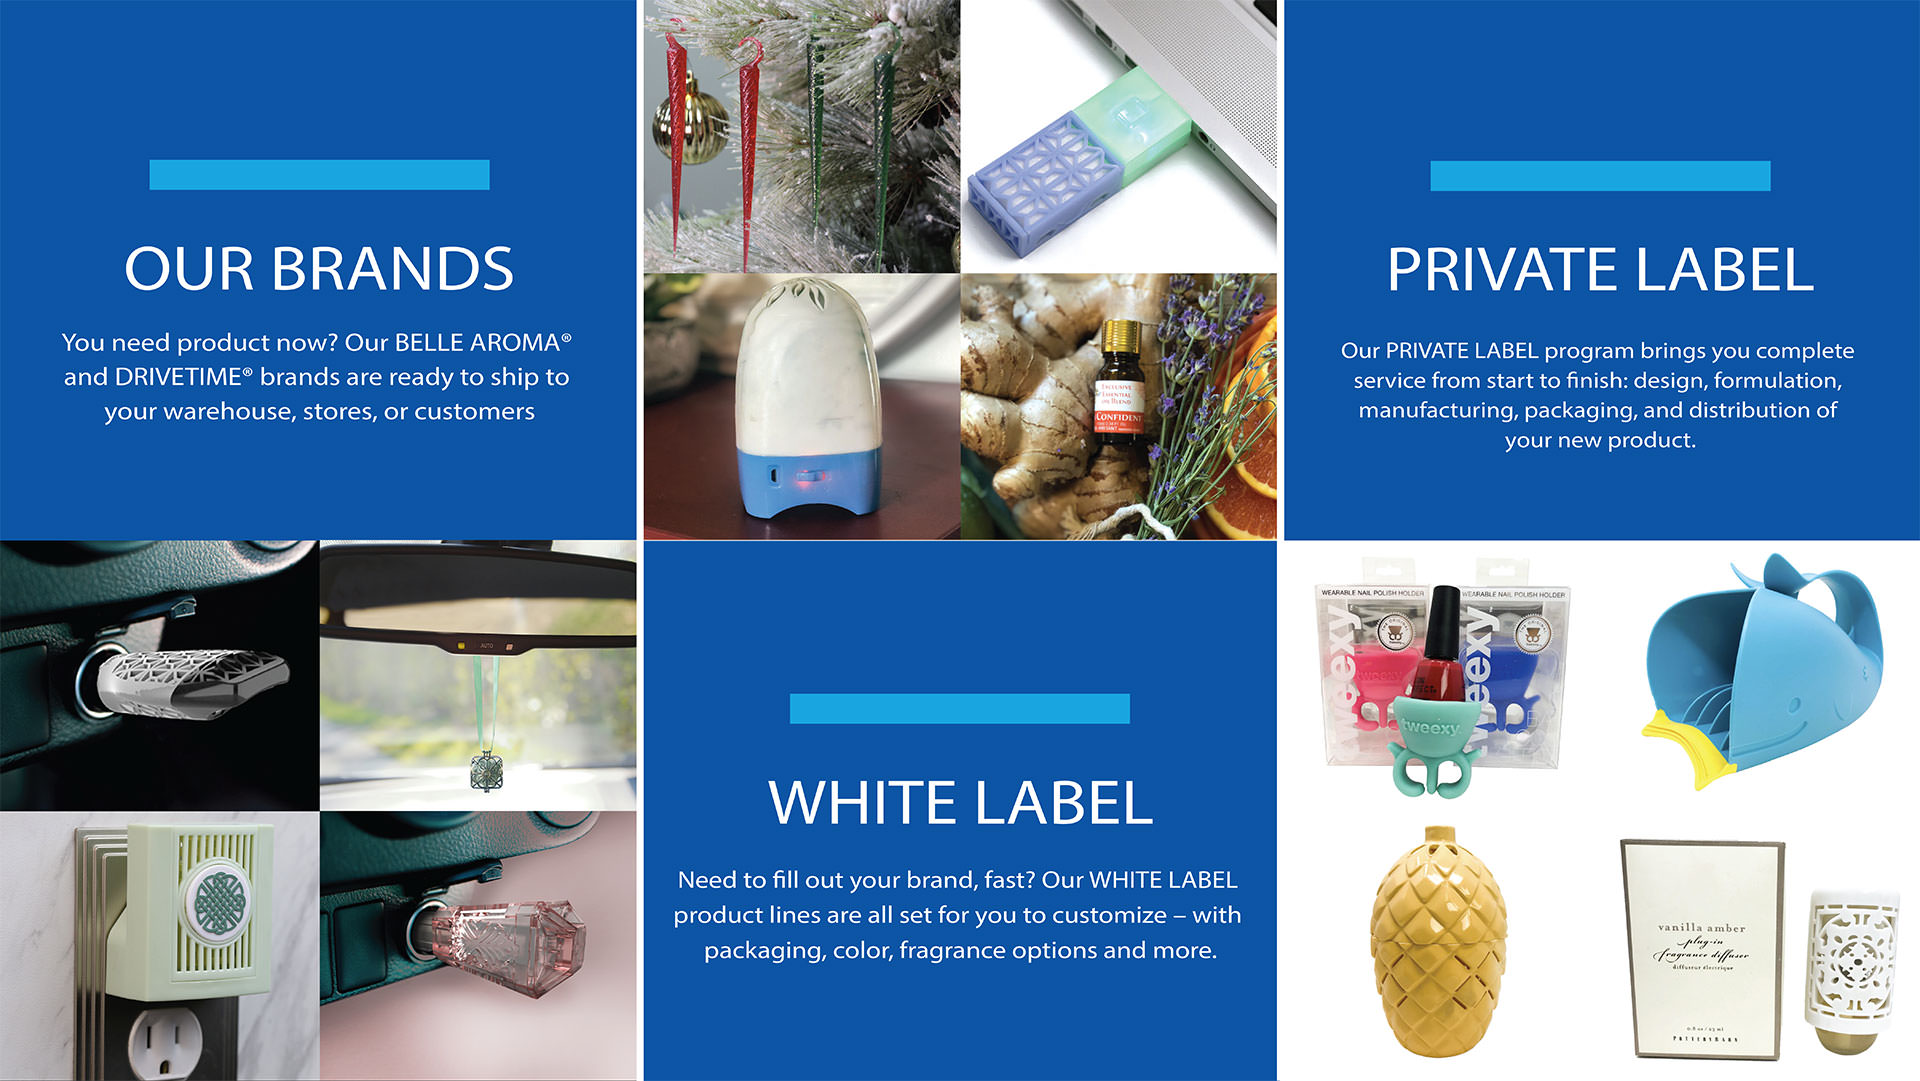 AERON Belle Aroma®and Drive Time® branded products, or White label and Private label programs